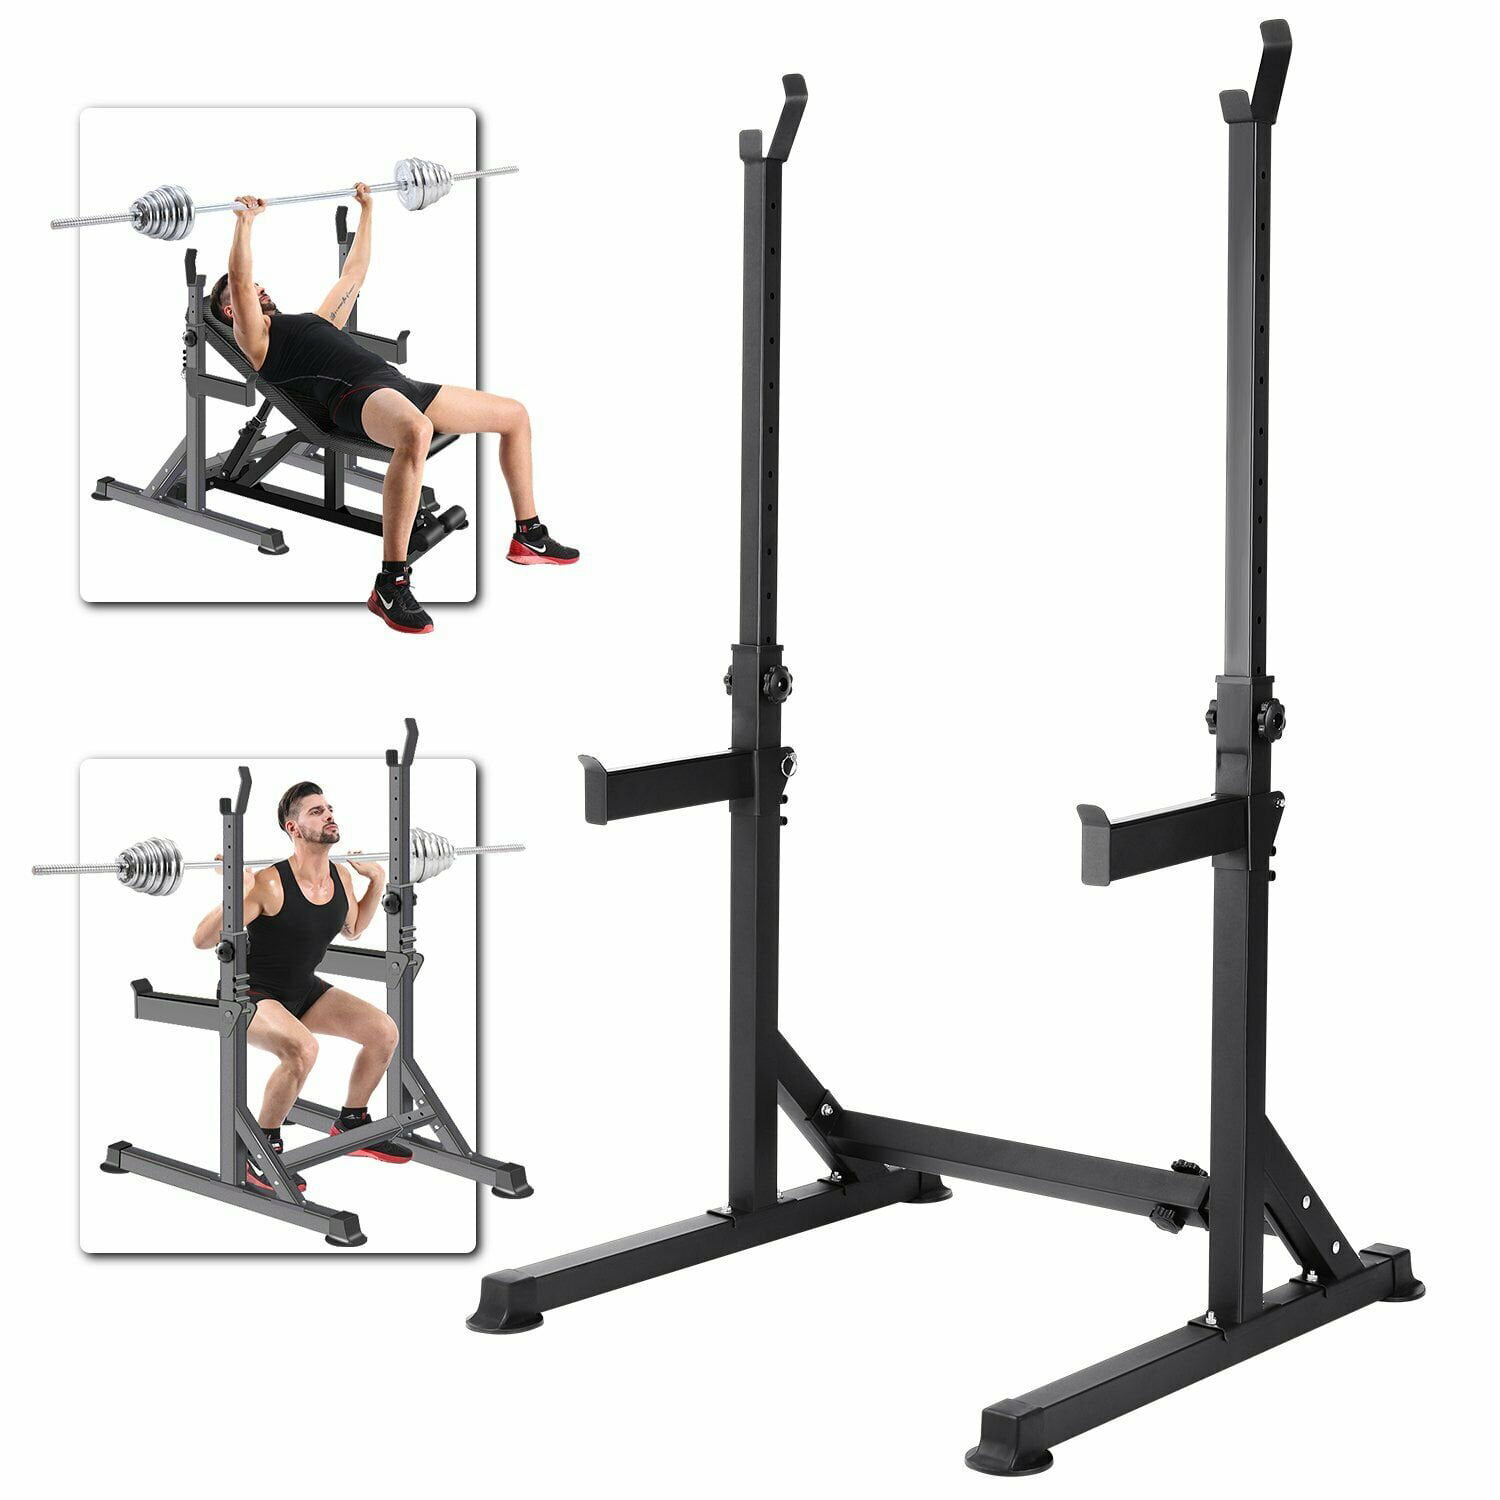 Adjustable Squat Rack Bench Press Gym Weight Lifting Barbell Stand Home Workout 